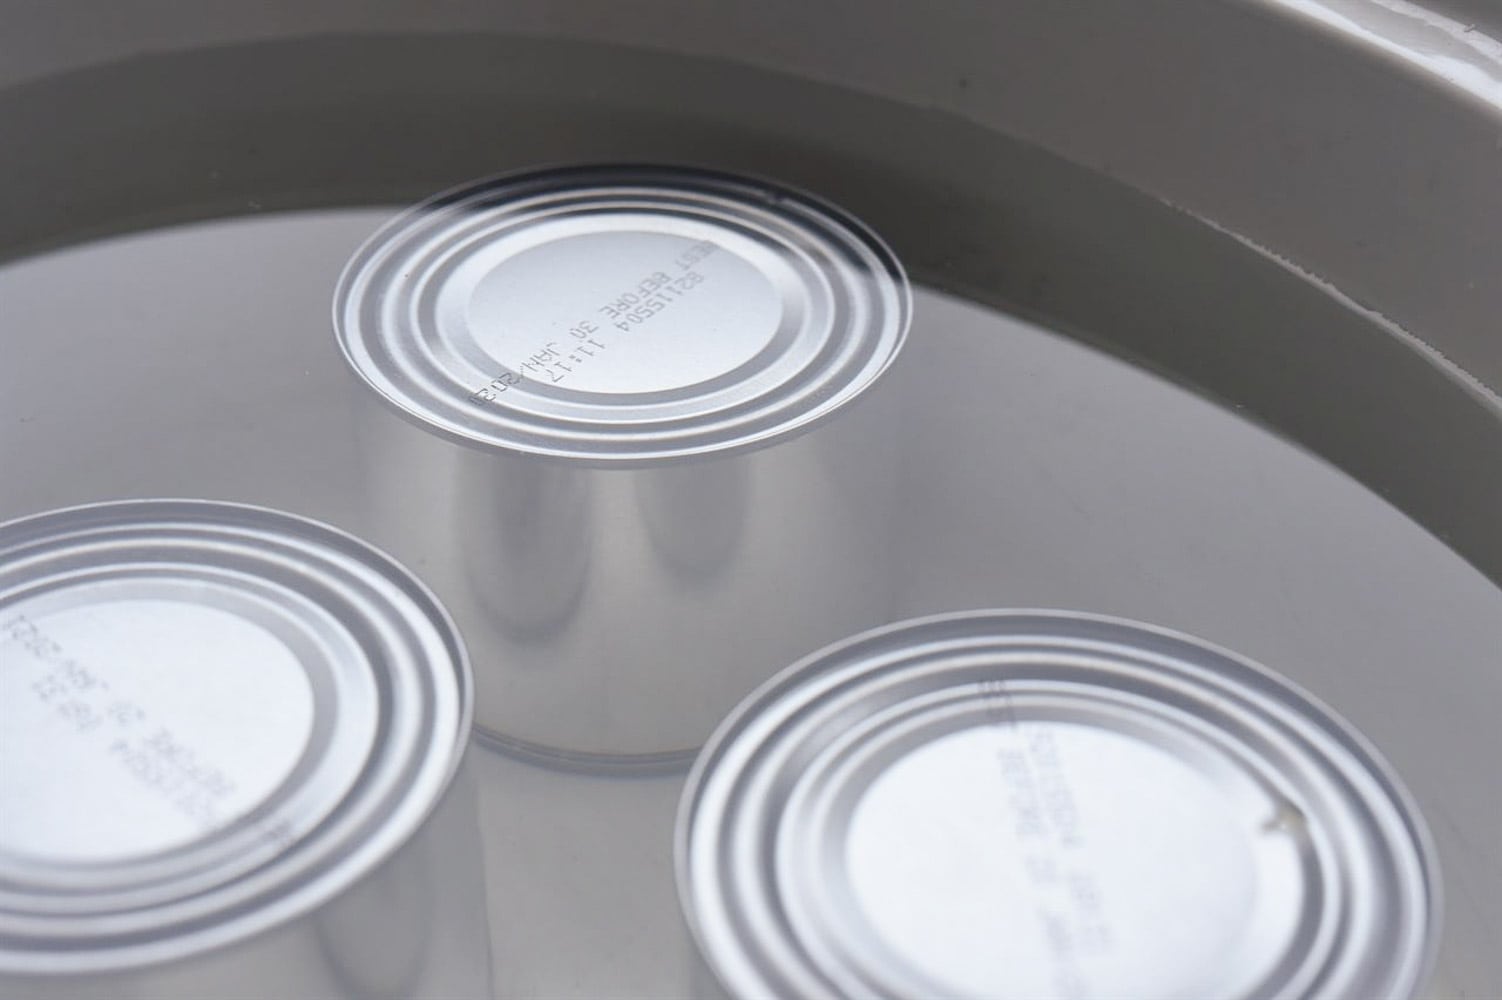 cans of sweetened condensed milk in a crock pot